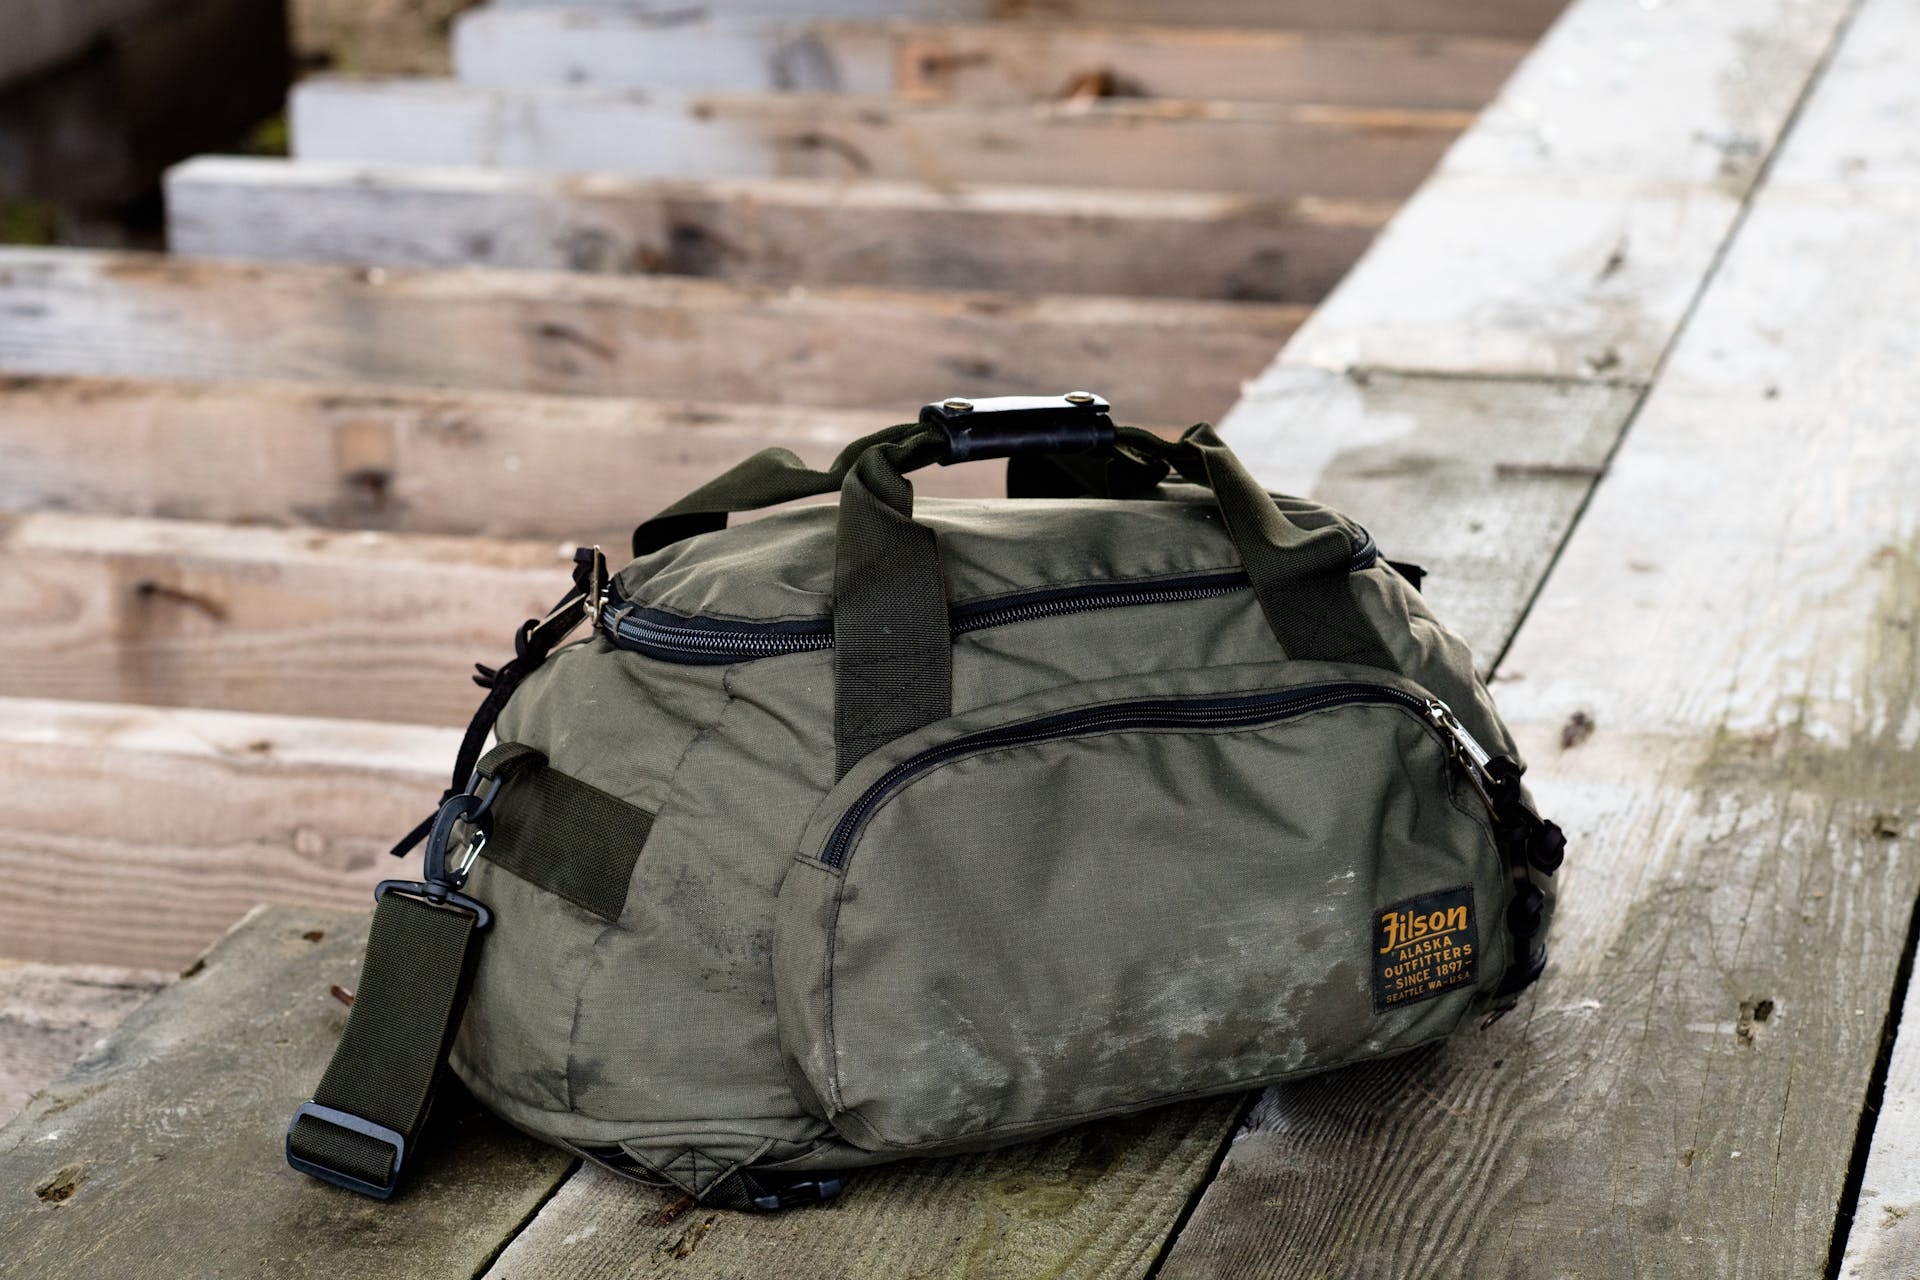 Filson Duffle Pack in otter green resting on wooden plank